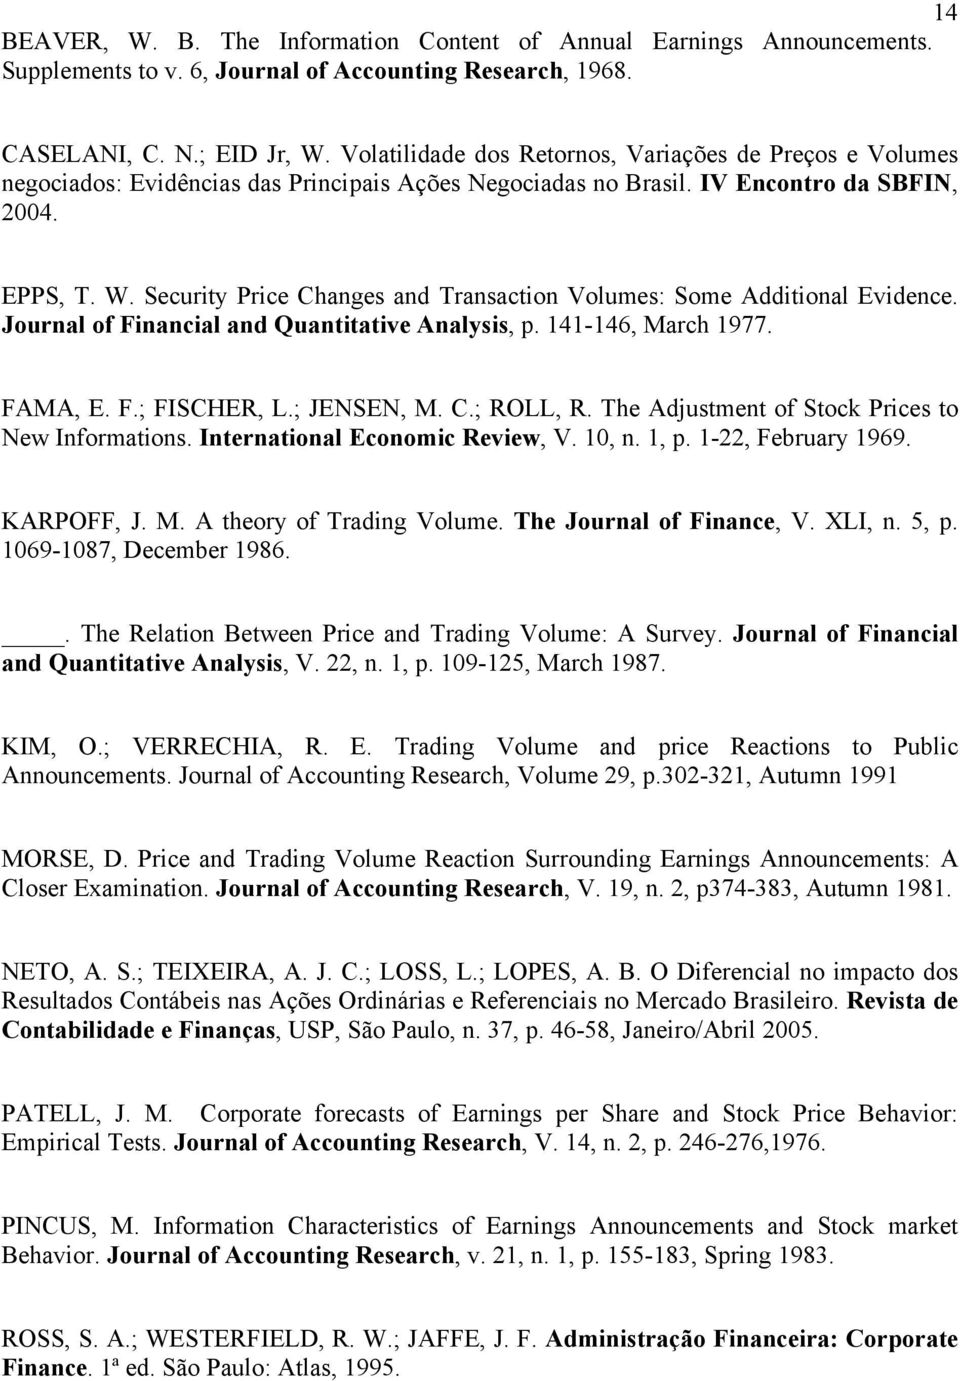 Security Price Changes and Transaction Volumes: Some Additional Evidence. Journal of Financial and Quantitative Analysis, p. 141-146, March 1977. FAMA, E. F.; FISCHER, L.; JENSEN, M. C.; ROLL, R.